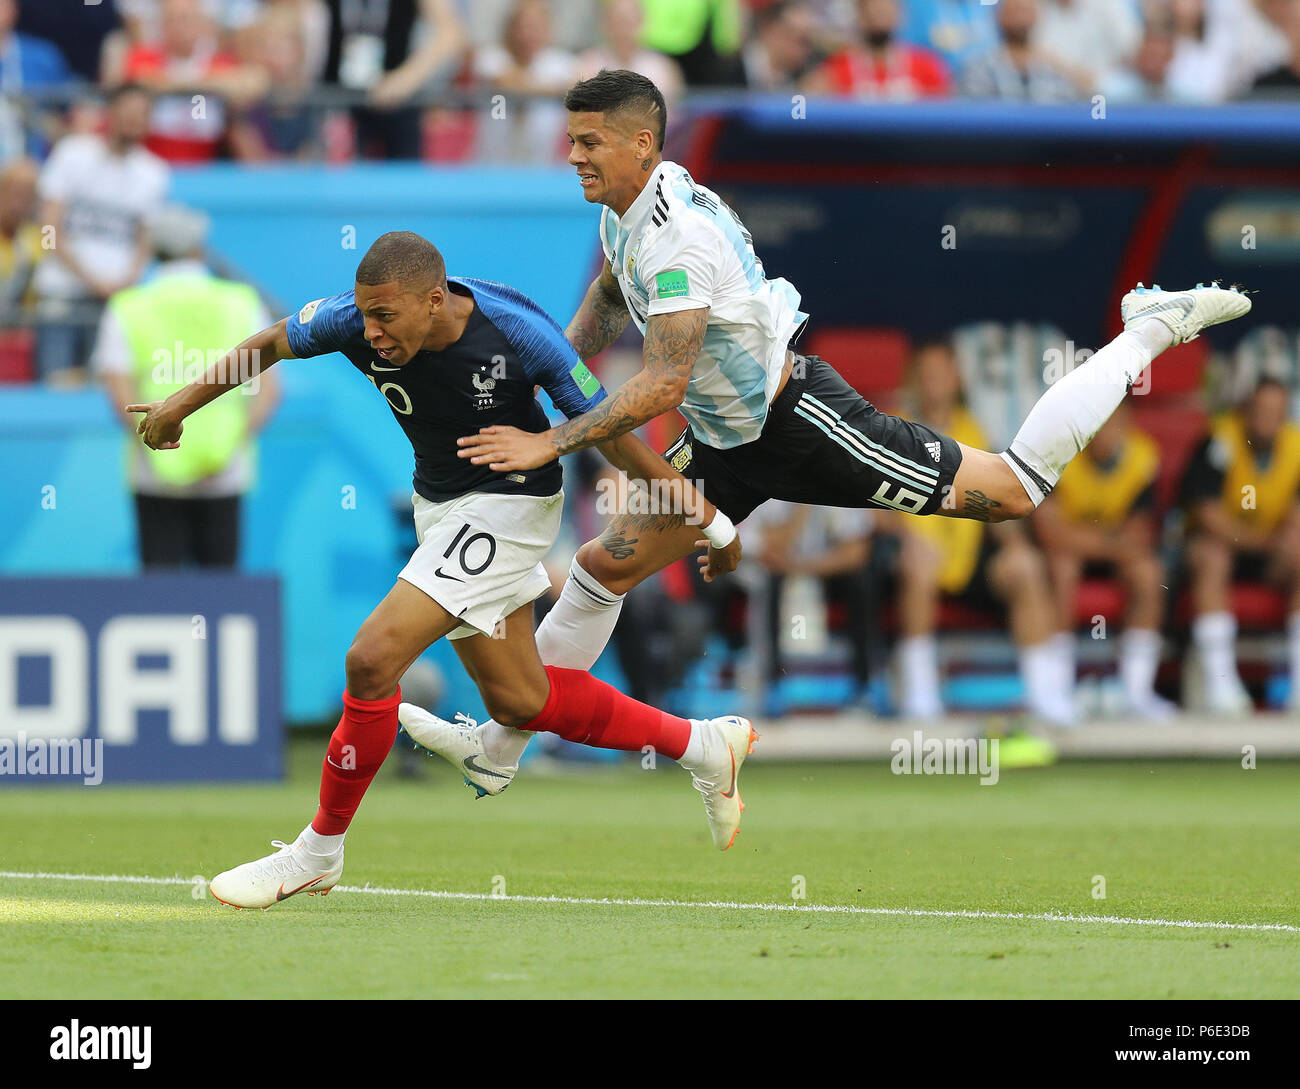 (180630) -- KAZAN, June 30, 2018 (Xinhua) -- Kylian Mbappe (L) of France is fouled by Marcos Rojo of Argentina during the 2018 FIFA World Cup round of 16 match between France and Argentina in Kazan, Russia, on June 30, 2018. (Xinhua/Lu Jinbo) Stock Photo